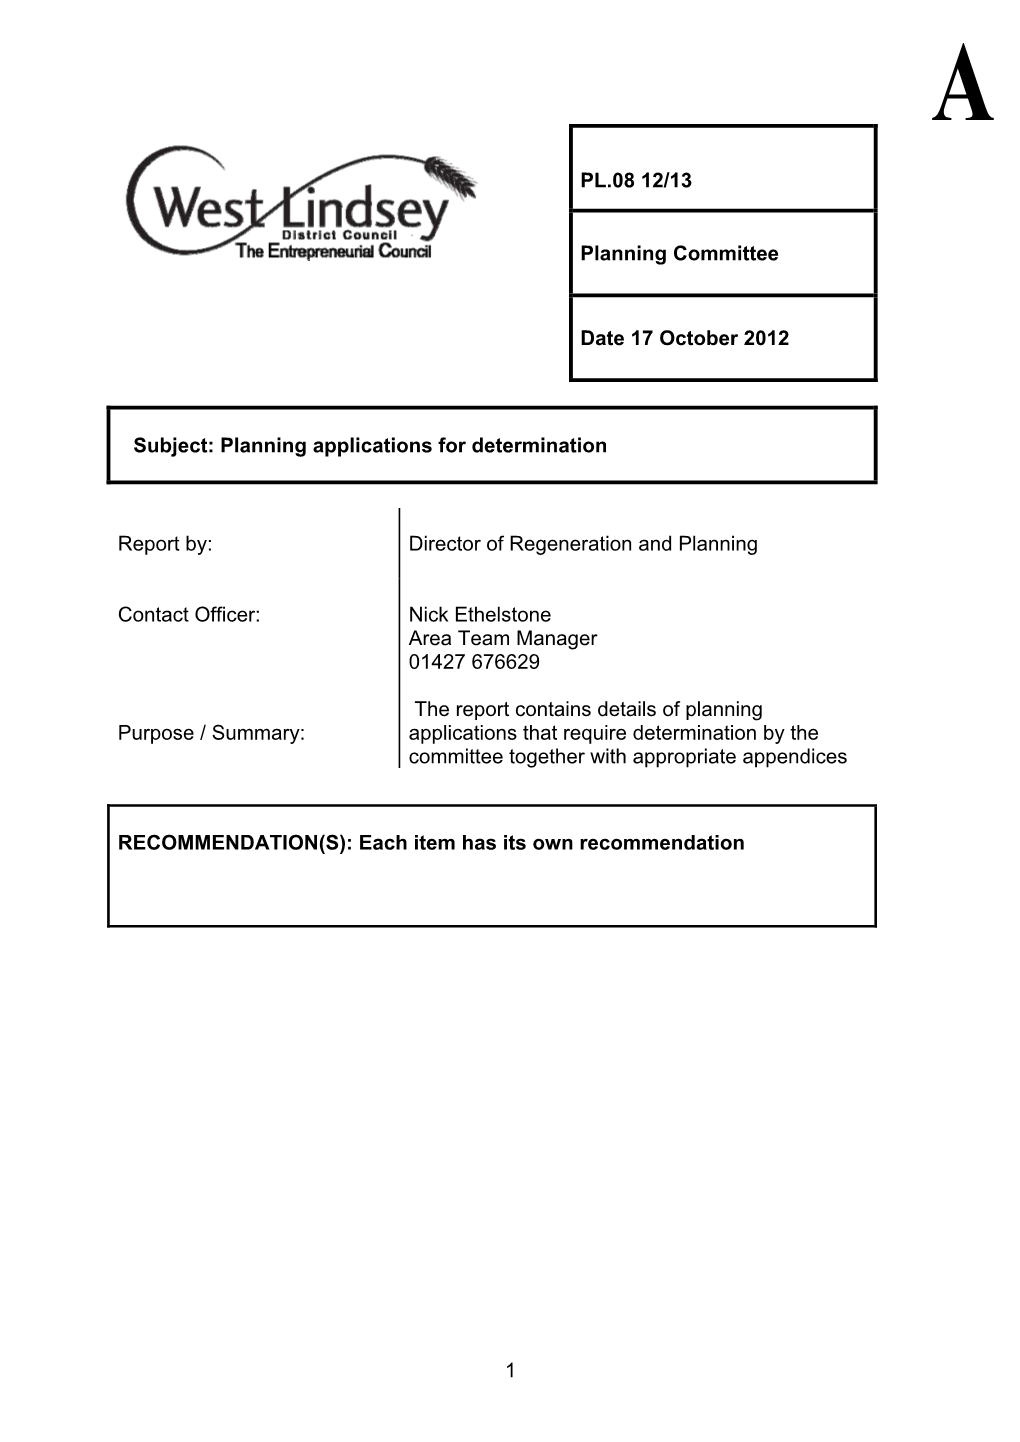 Planning Applications for Determination